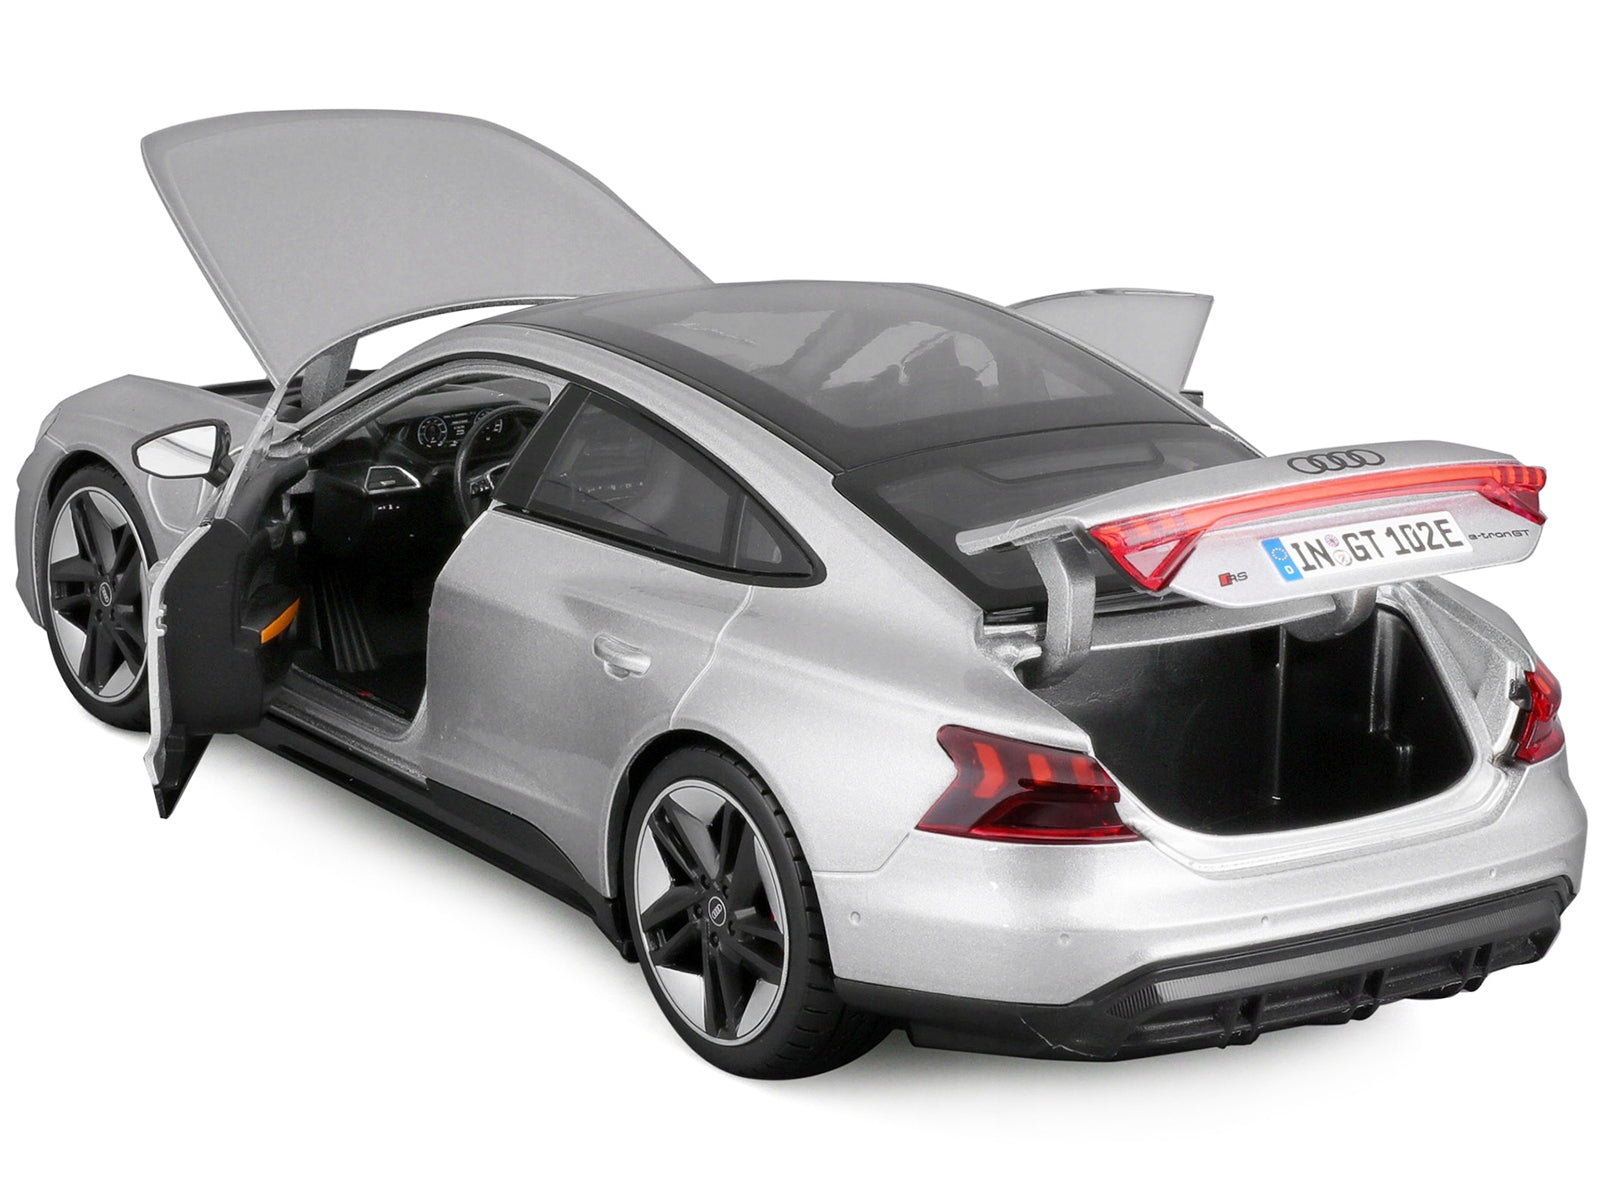 2022 Audi RS e-tron GT Silver Metallic with Sunroof 1/18 Diecast Model Car by Bburago